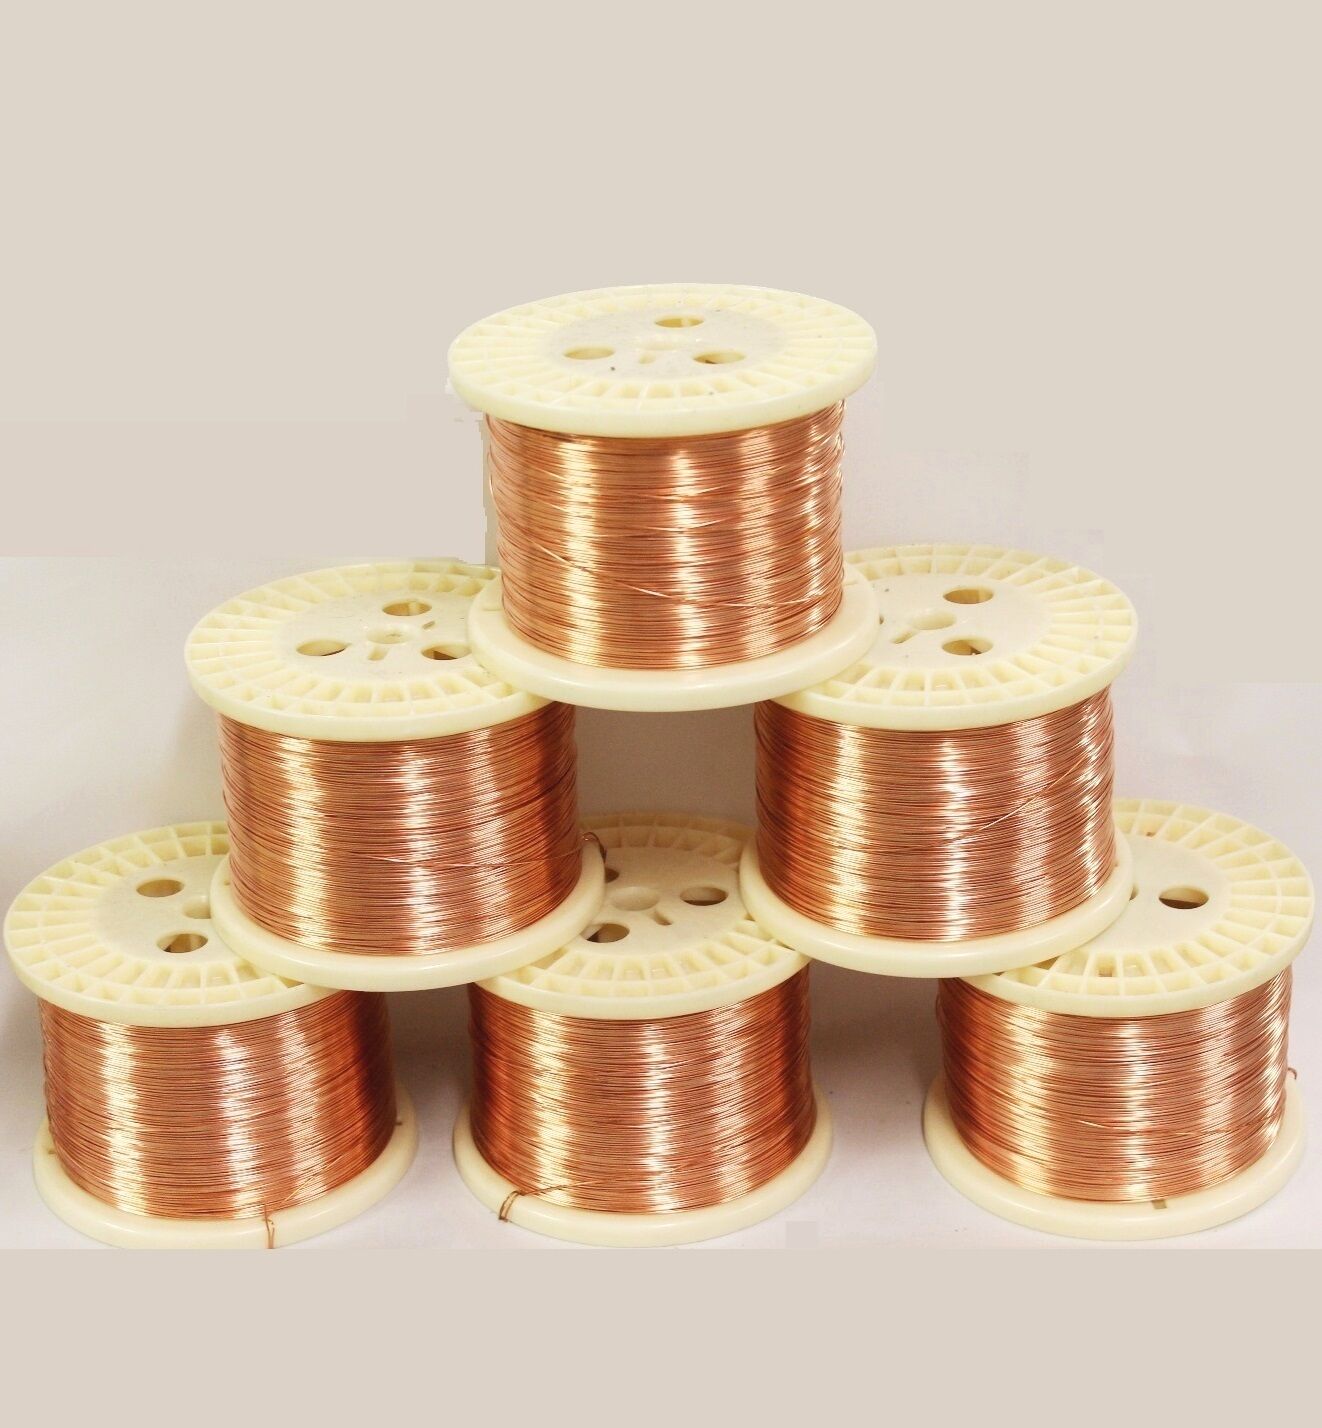 Round Copper Wire  / Jewelry Making ,Hobby, craft / 50 Ft or less Coil .